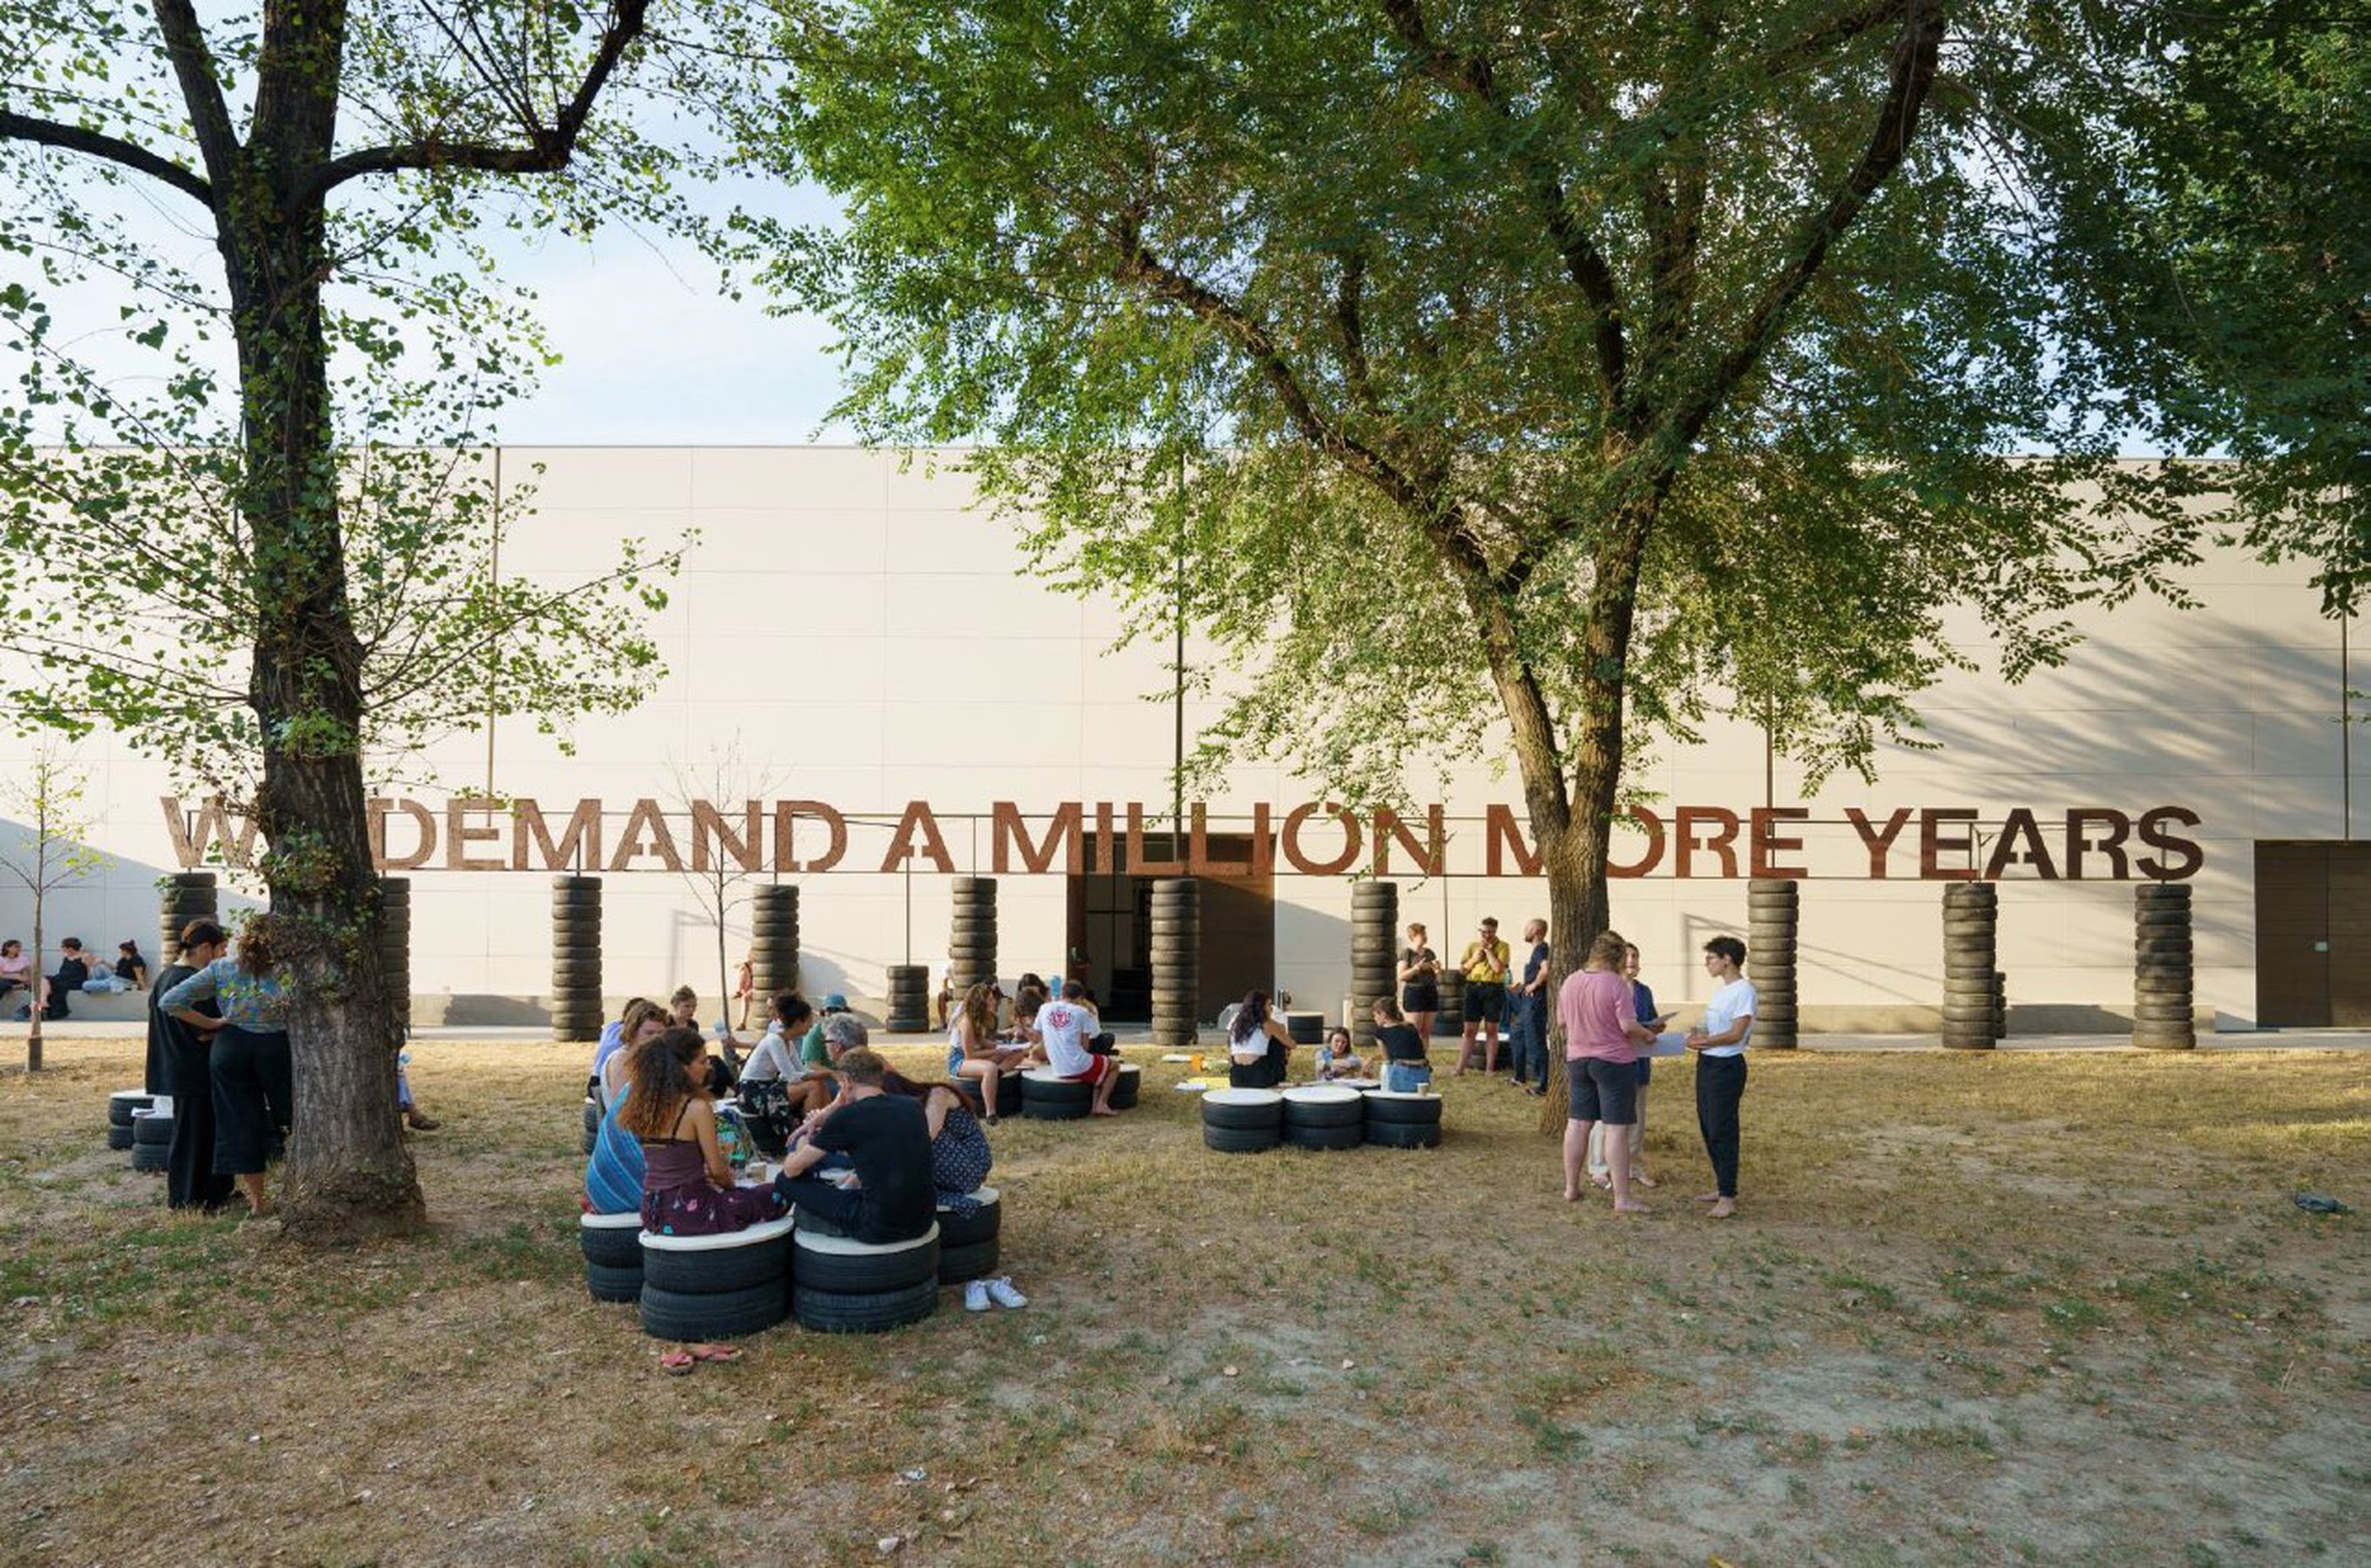 We Demand a Million More Years (text piece # 2022 Jonas Staal Wood, paint, soil, steel, defunct car tires, approximately 300x2970 cm